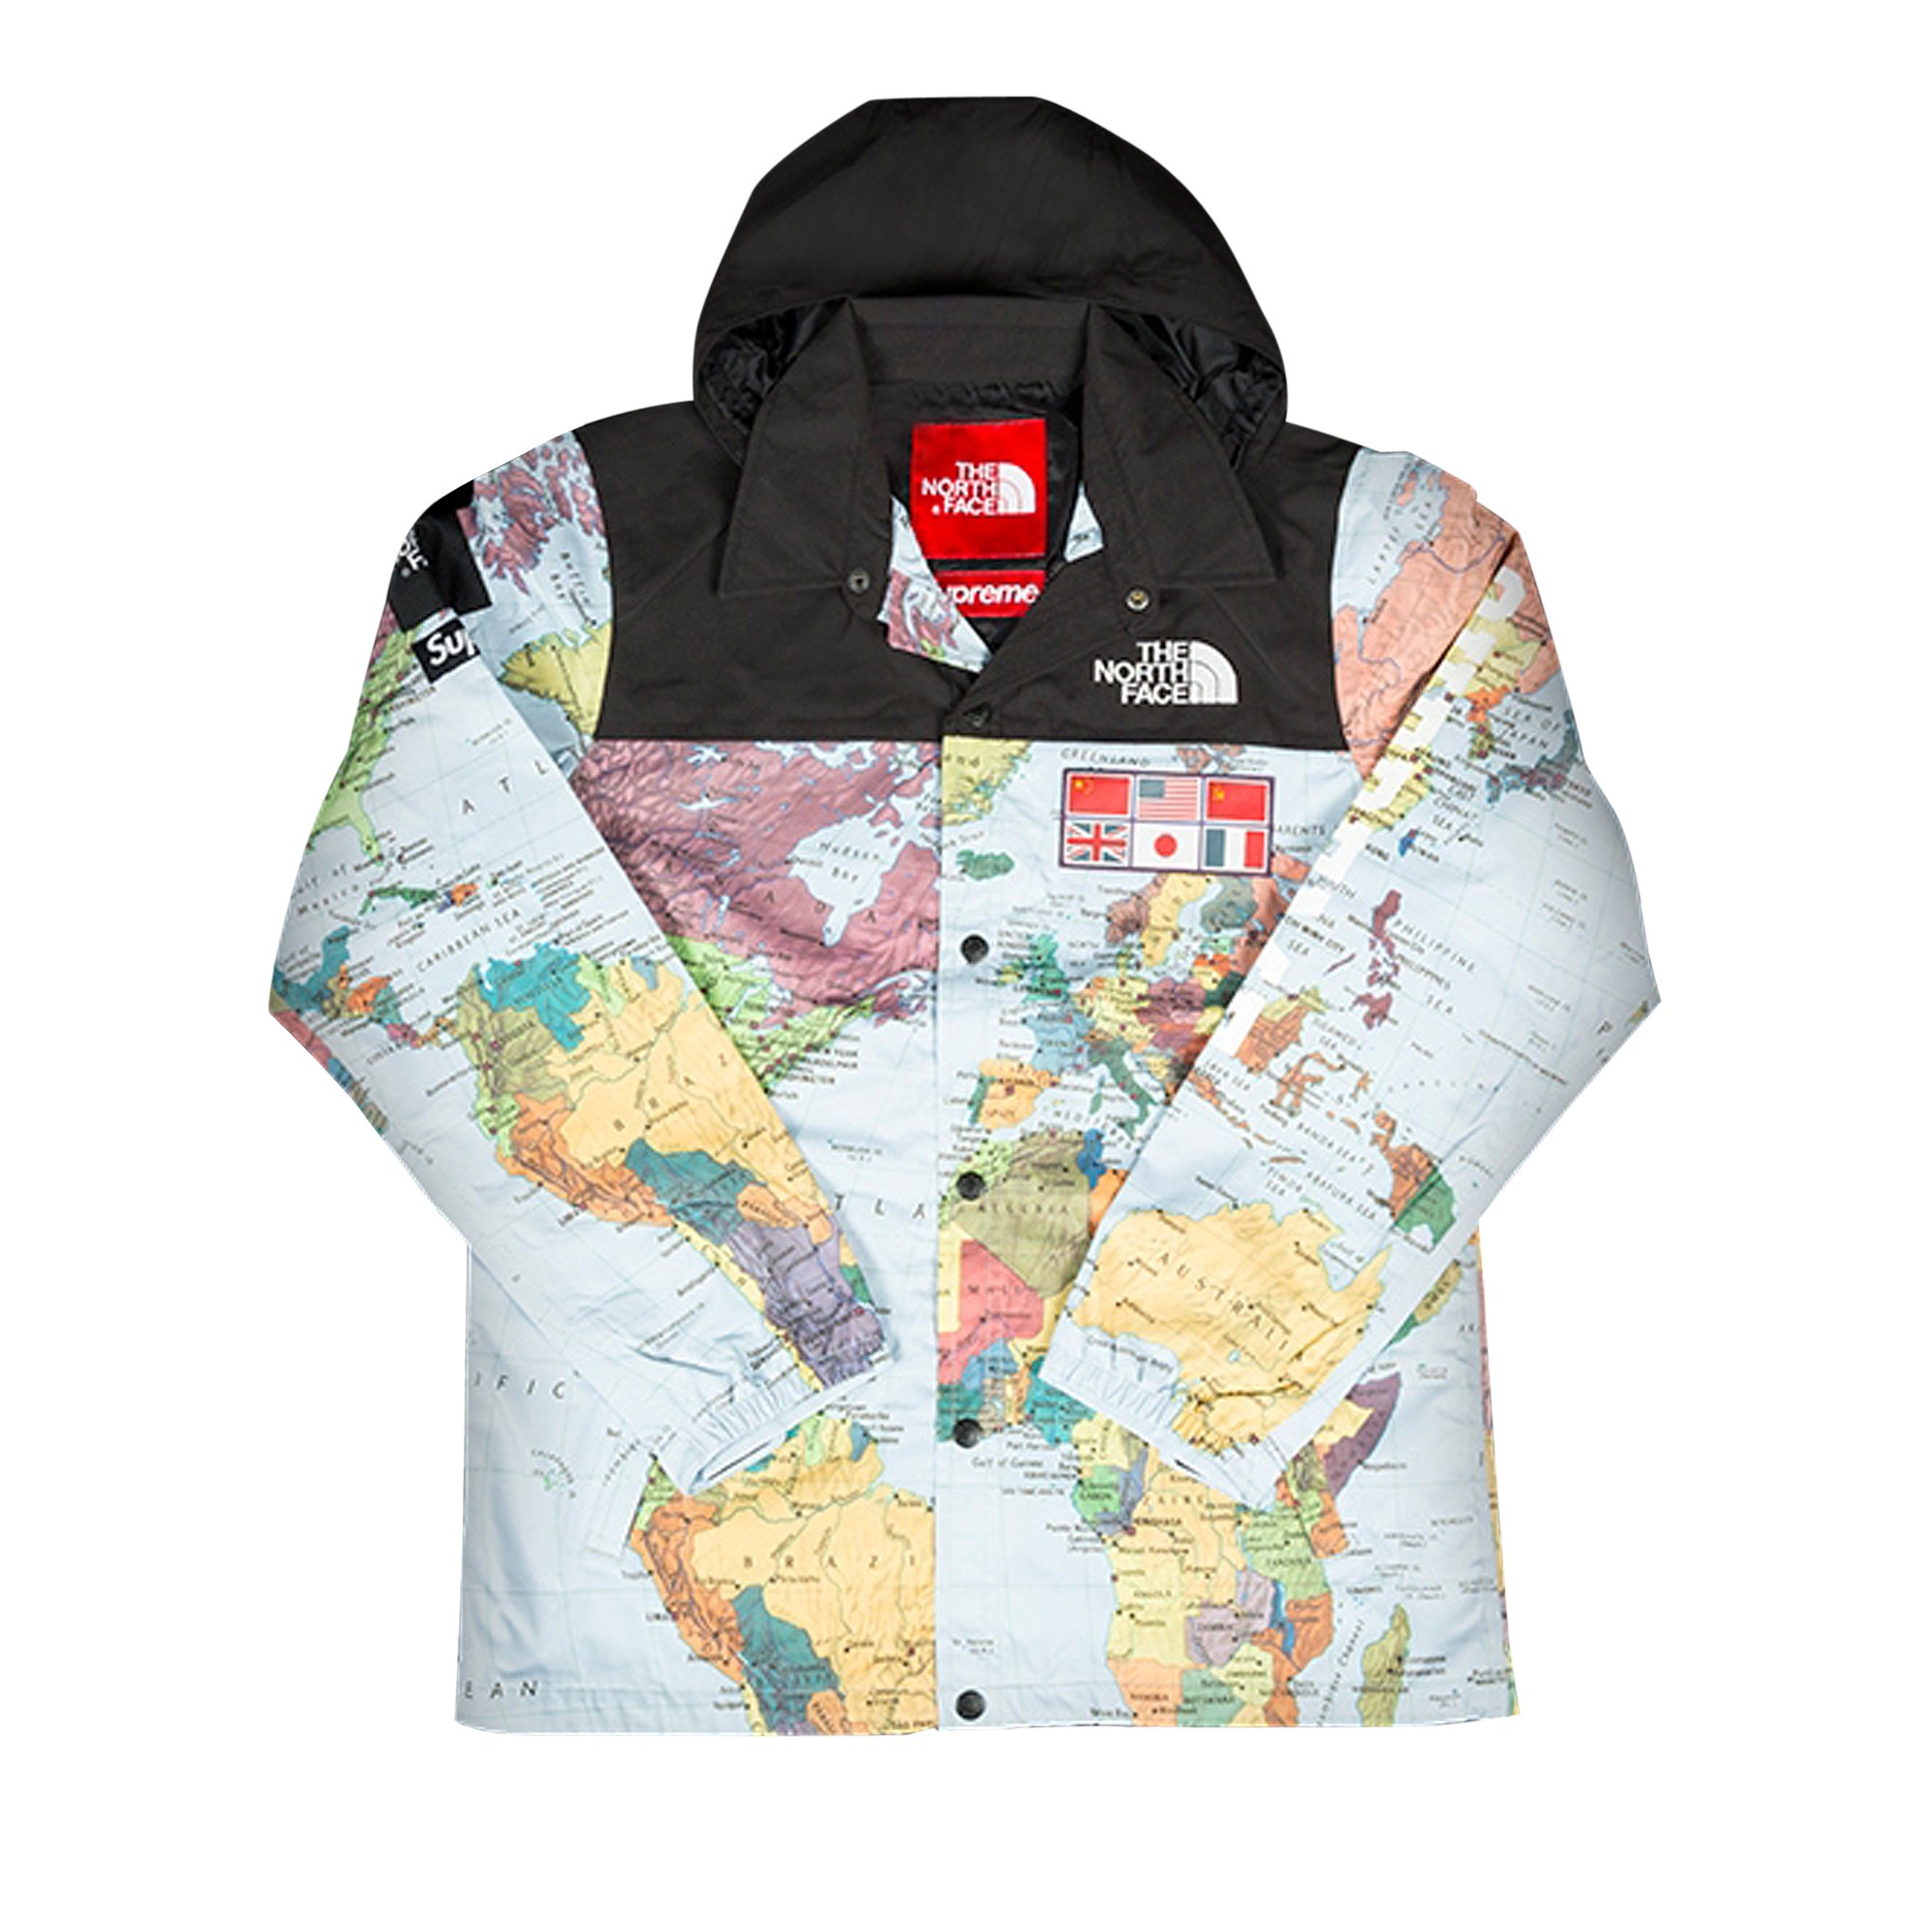 Buy Supreme x The North Face Expedition Coaches Jacket 'Map